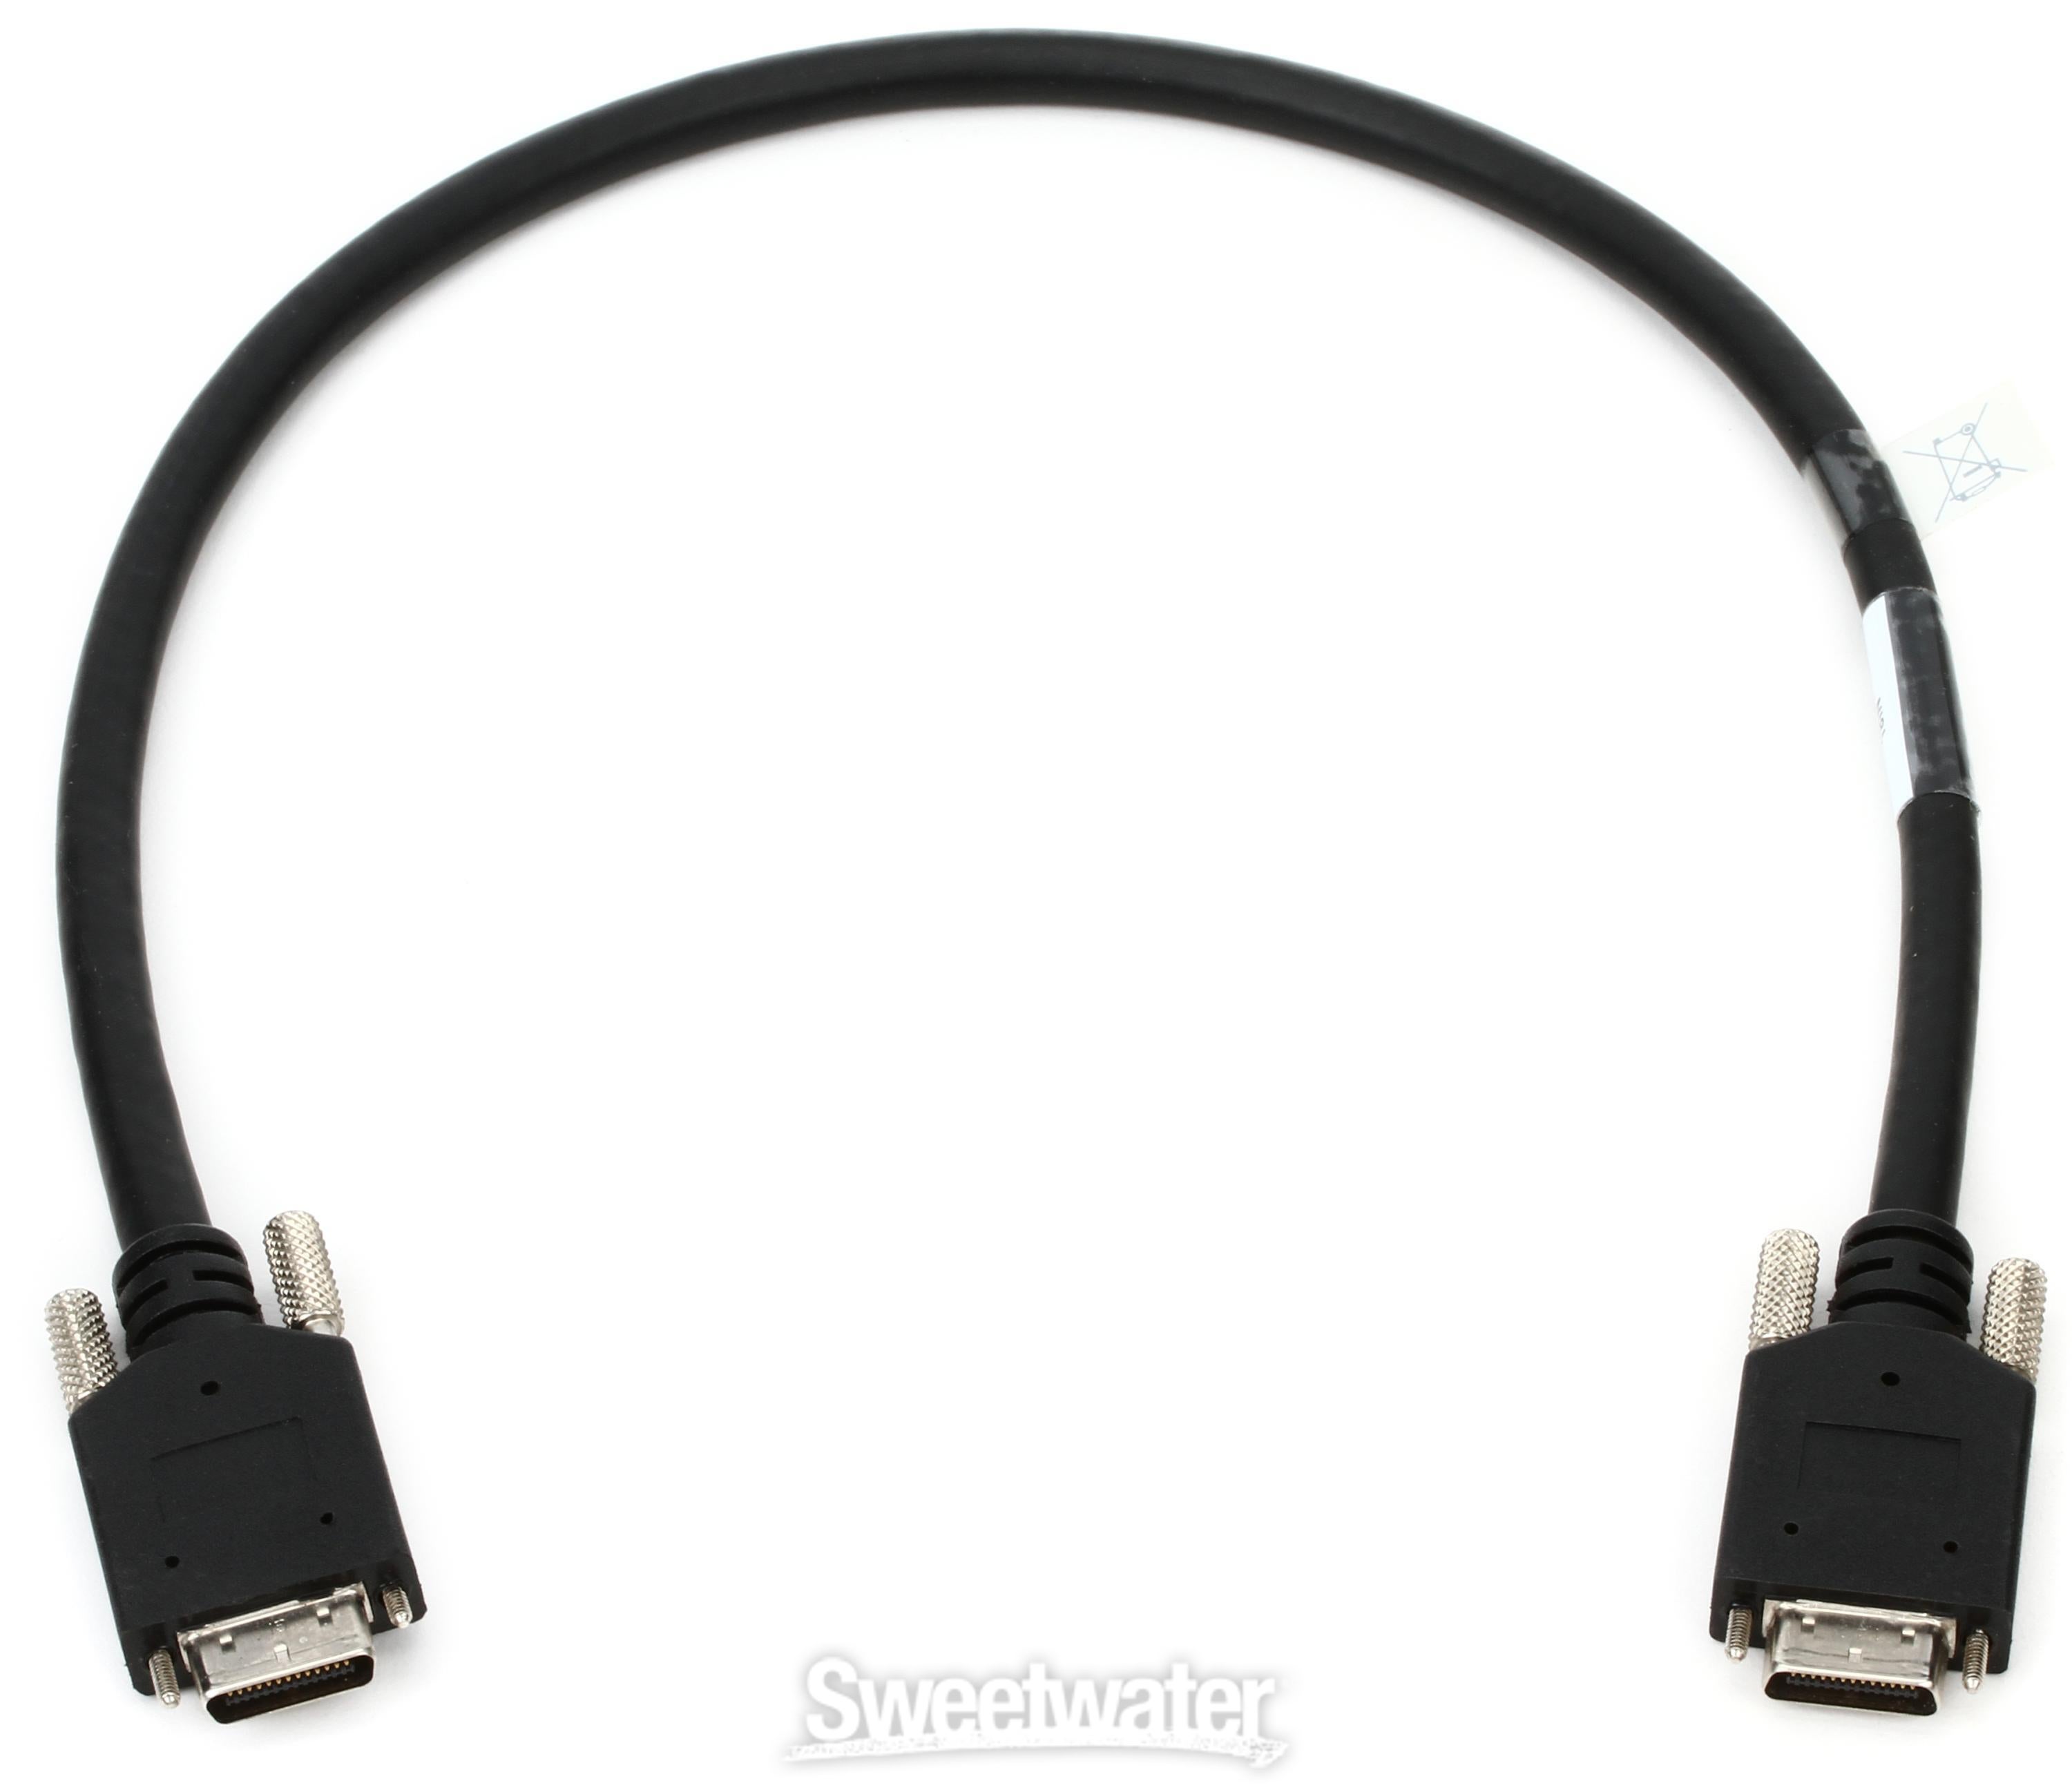 Avid DigiLink Mini Cable - 1.5 foot | Sweetwater